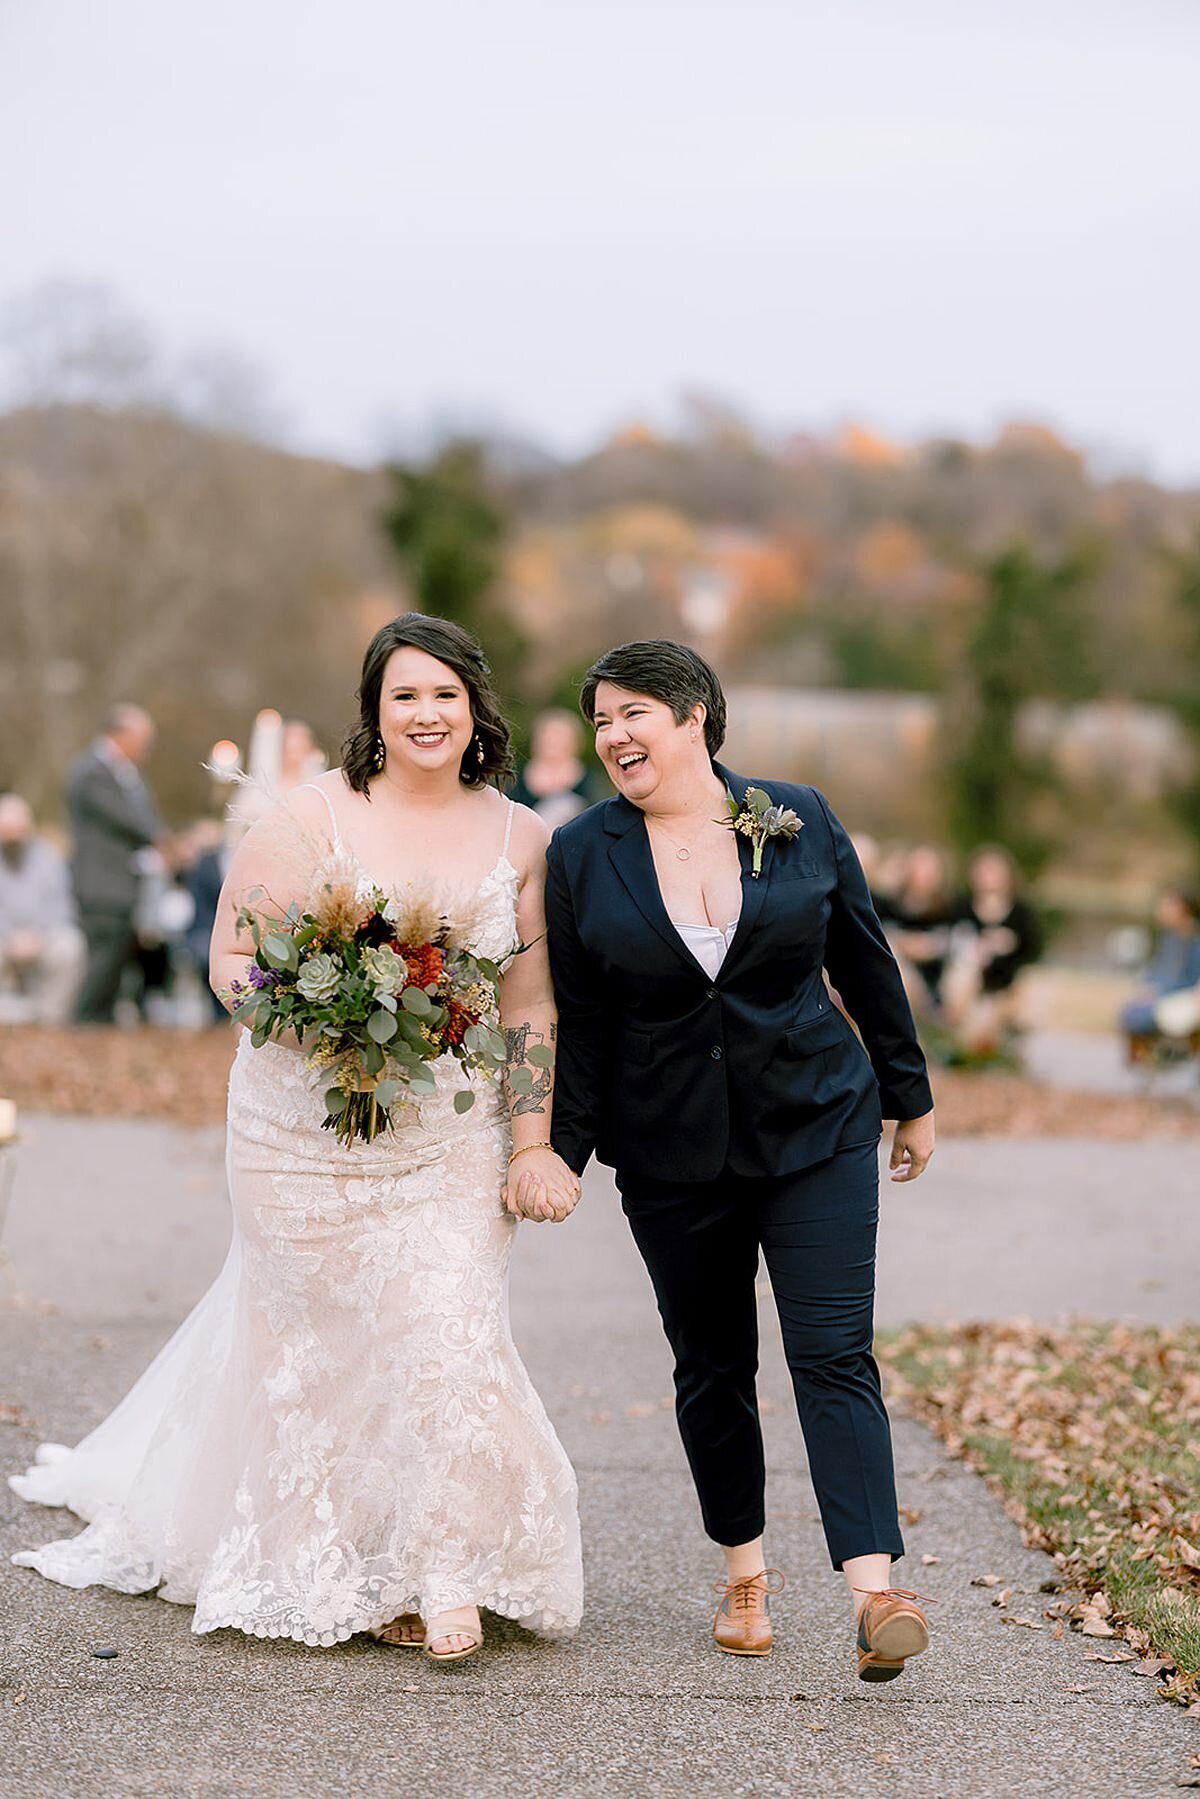 The bride wearing a long white lace dress carries a bouquet of yellow, orange and burgundy flowers and she walks down the aisle holding her wife's hand